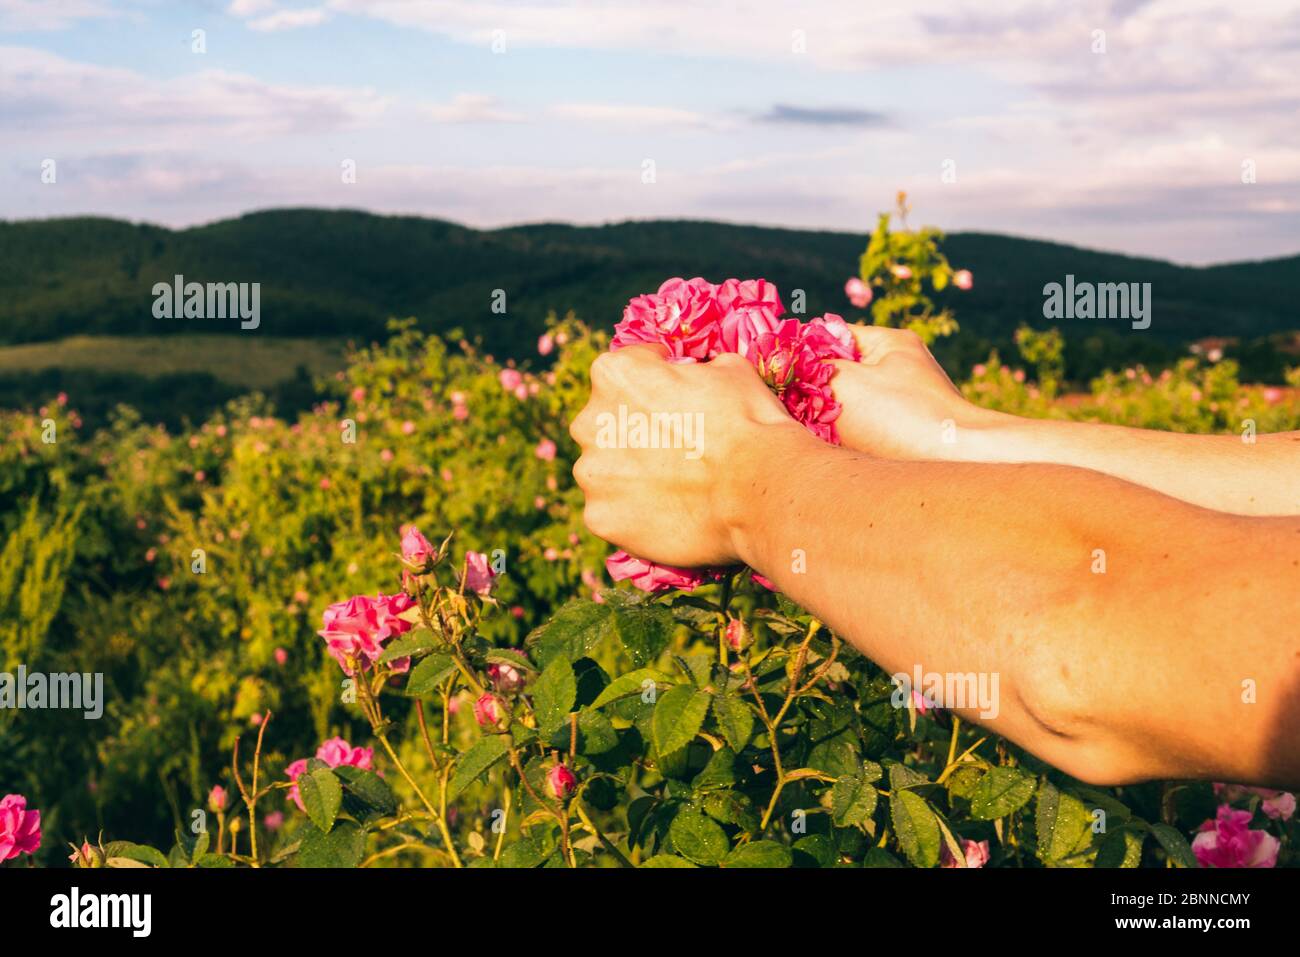 Hand of the rural worker pick fragrant flowers of pink roses for perfumery. Stock Photo